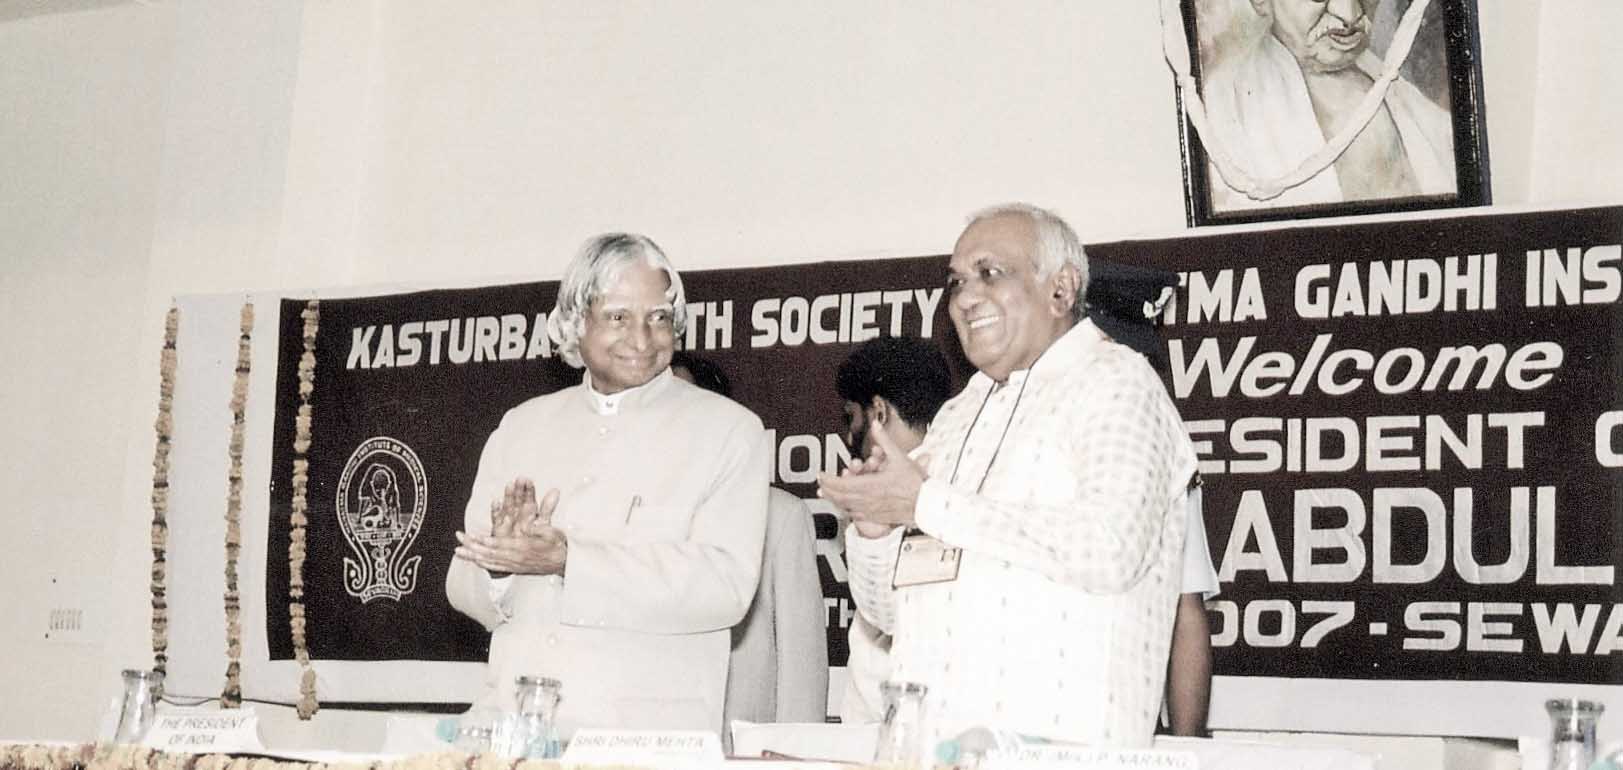 Abdul Kalam - then President of India in 2007